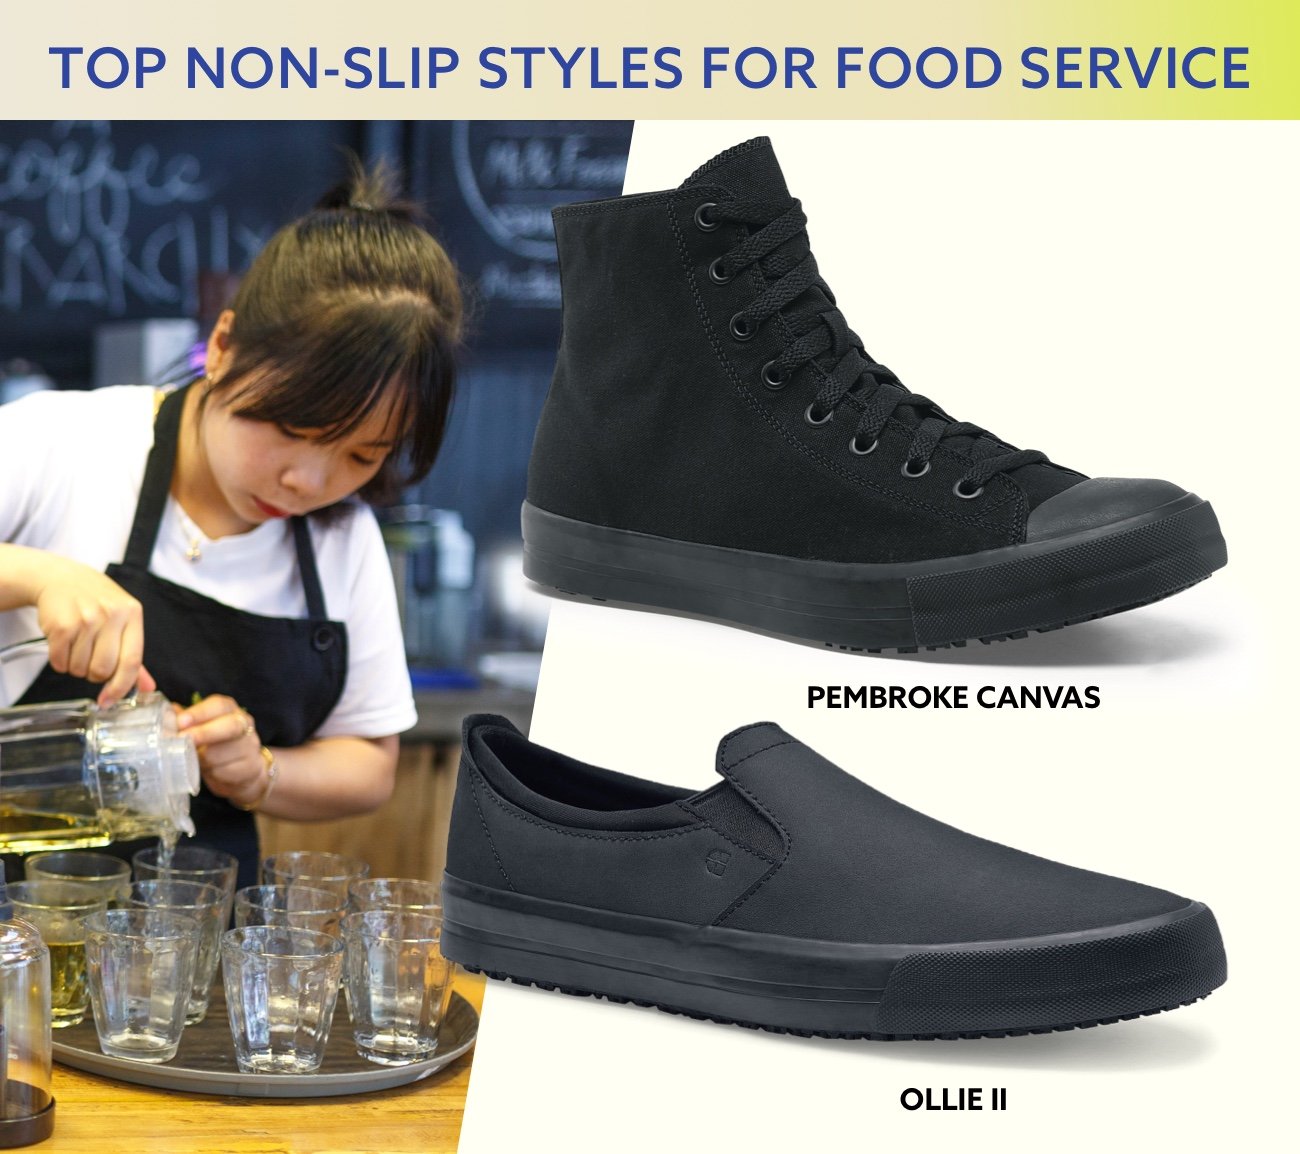 Shop Slip-Resistant Styles for Food Service.